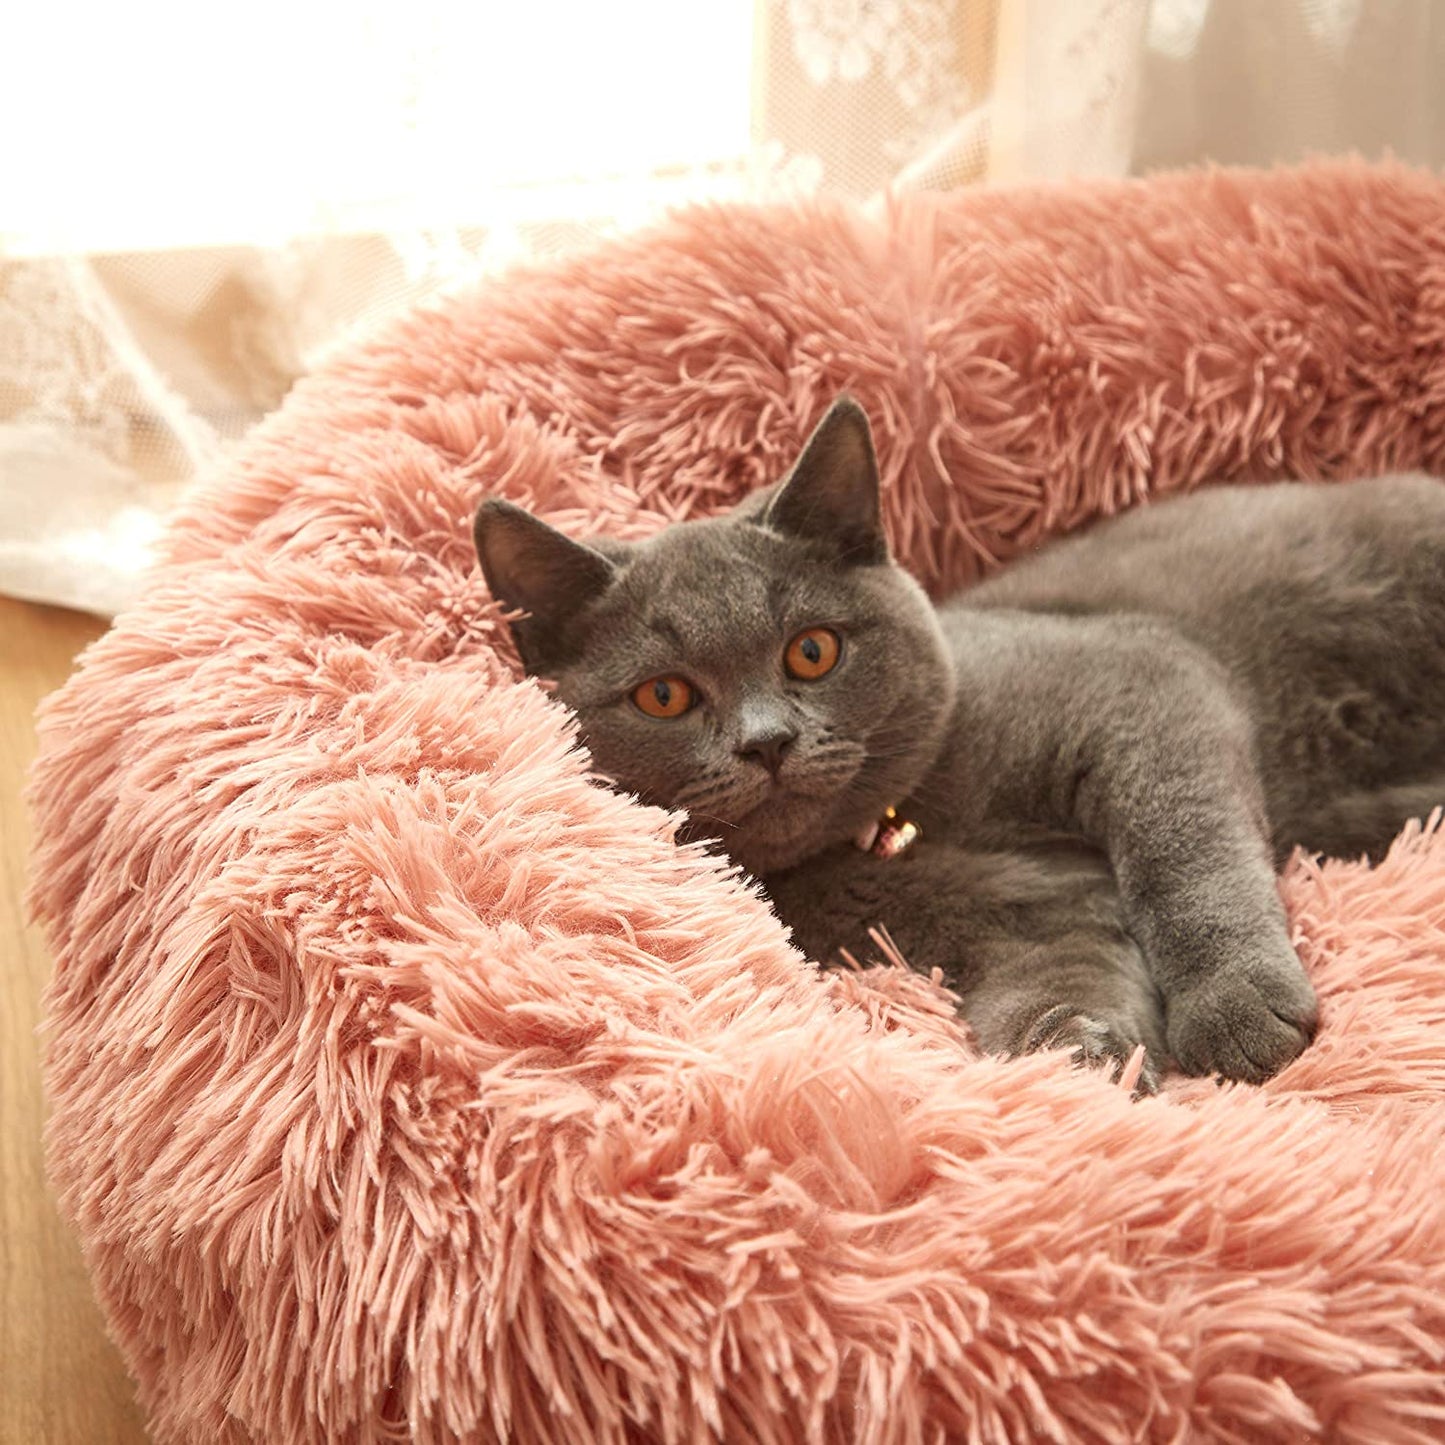 Cozy Pink Fuzzy Donut Bed for Dogs & Cats - Snuggly Winter Cushion for a Perfect Nap